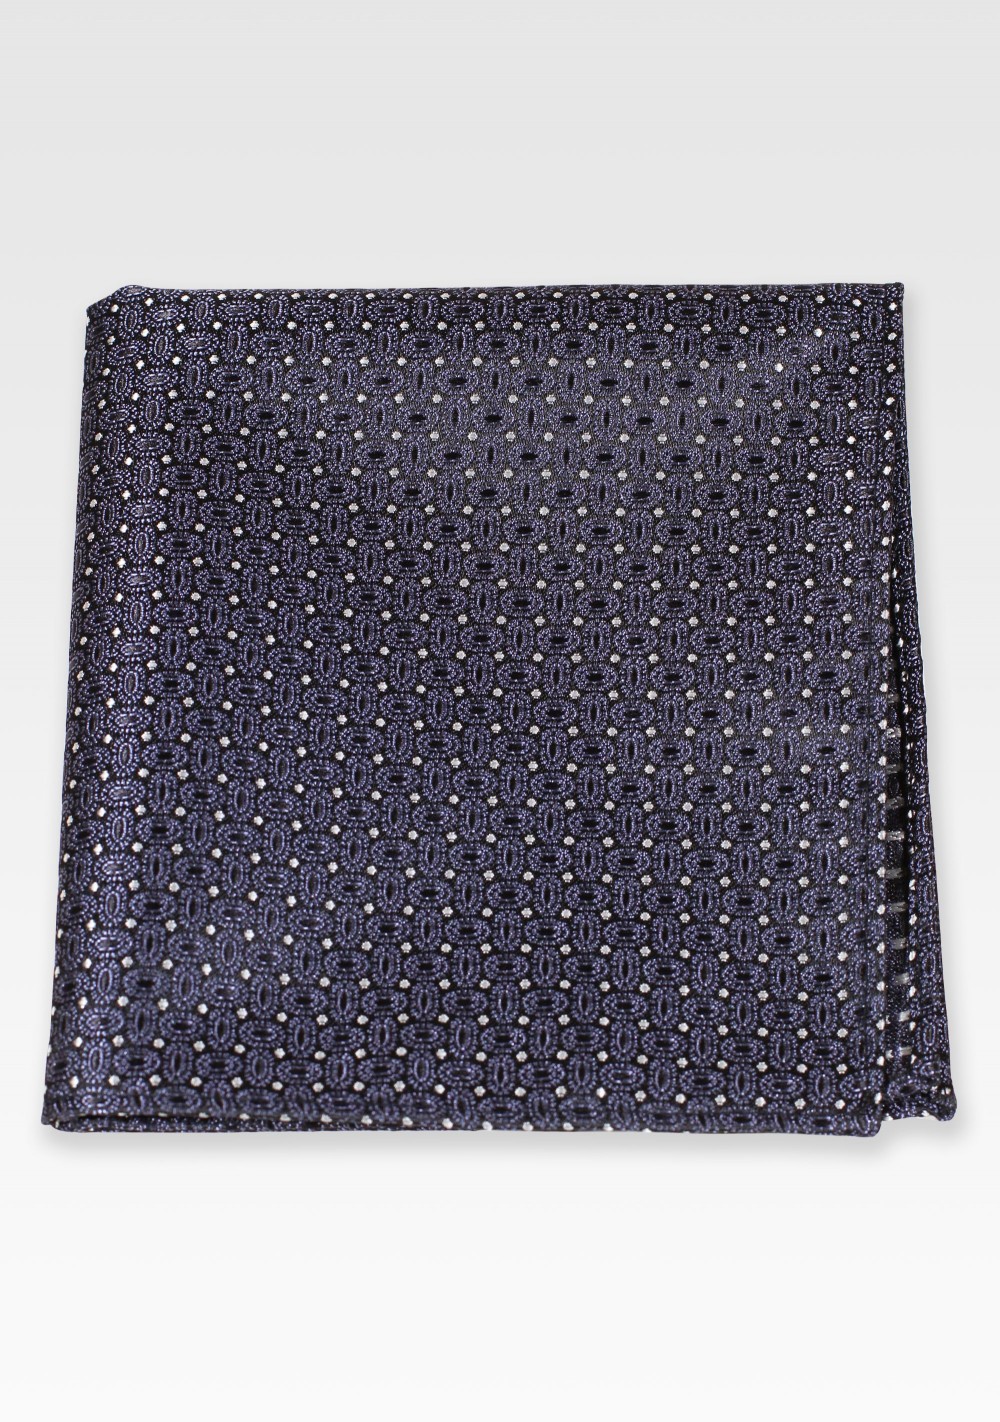 Patterned Pocket Square in Dark Charcoal Gray